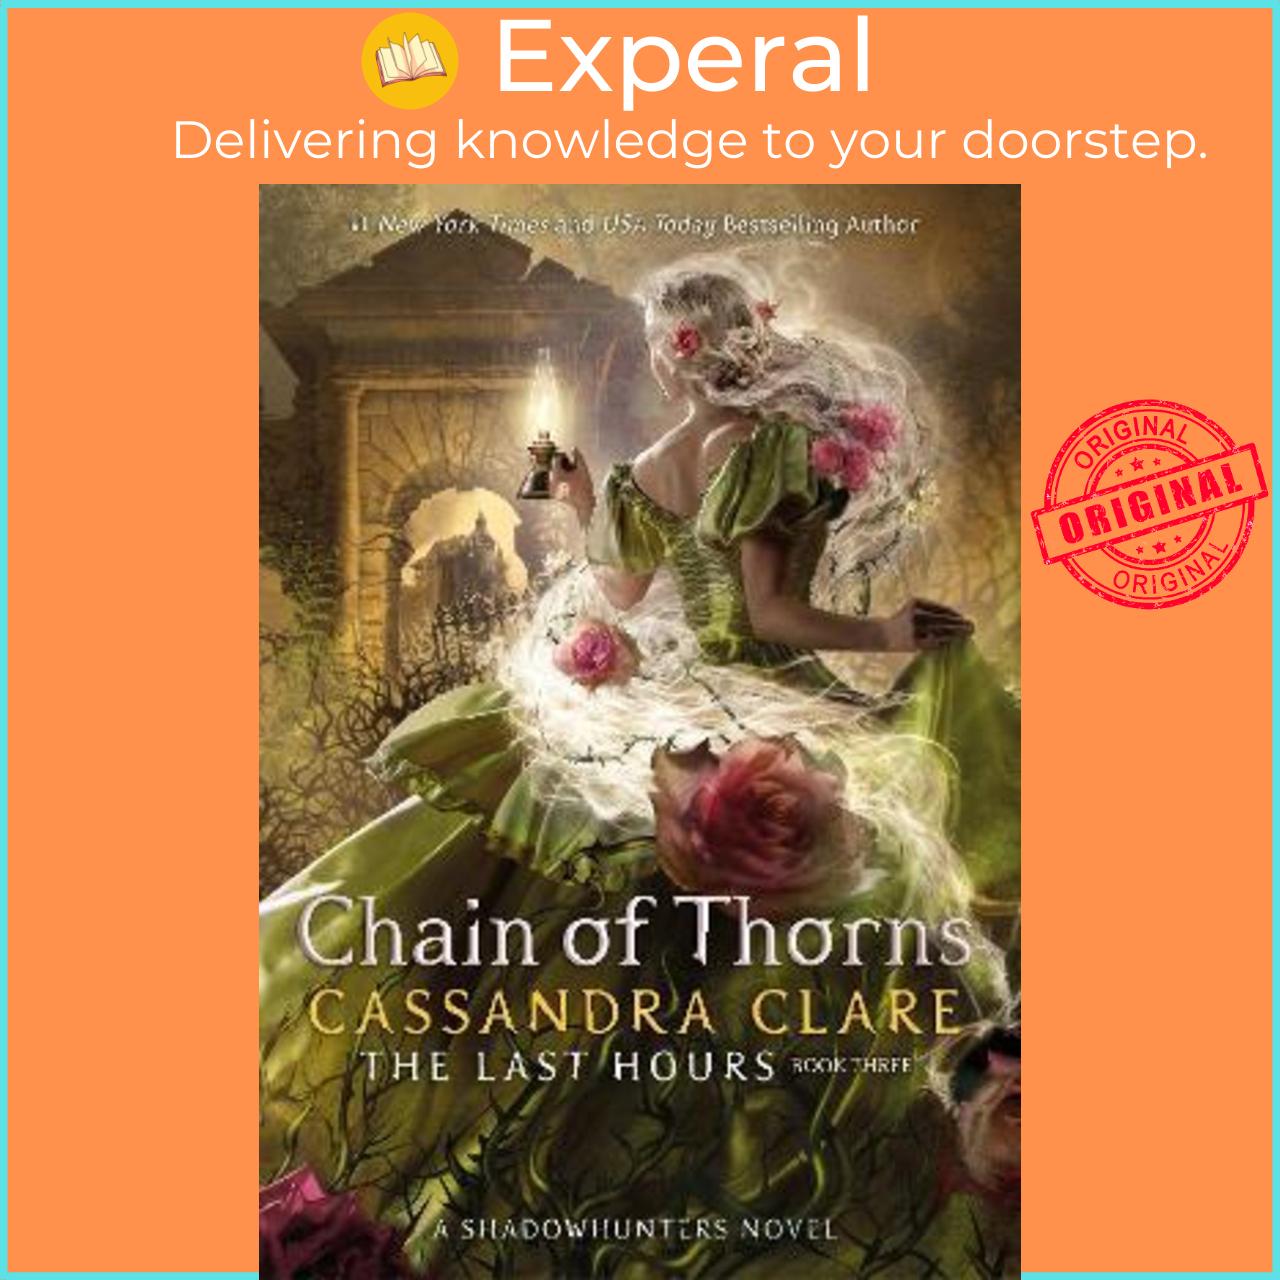 Sách - The Last Hours: Chain of Thorns by Cassandra Clare (UK edition, hardcover)